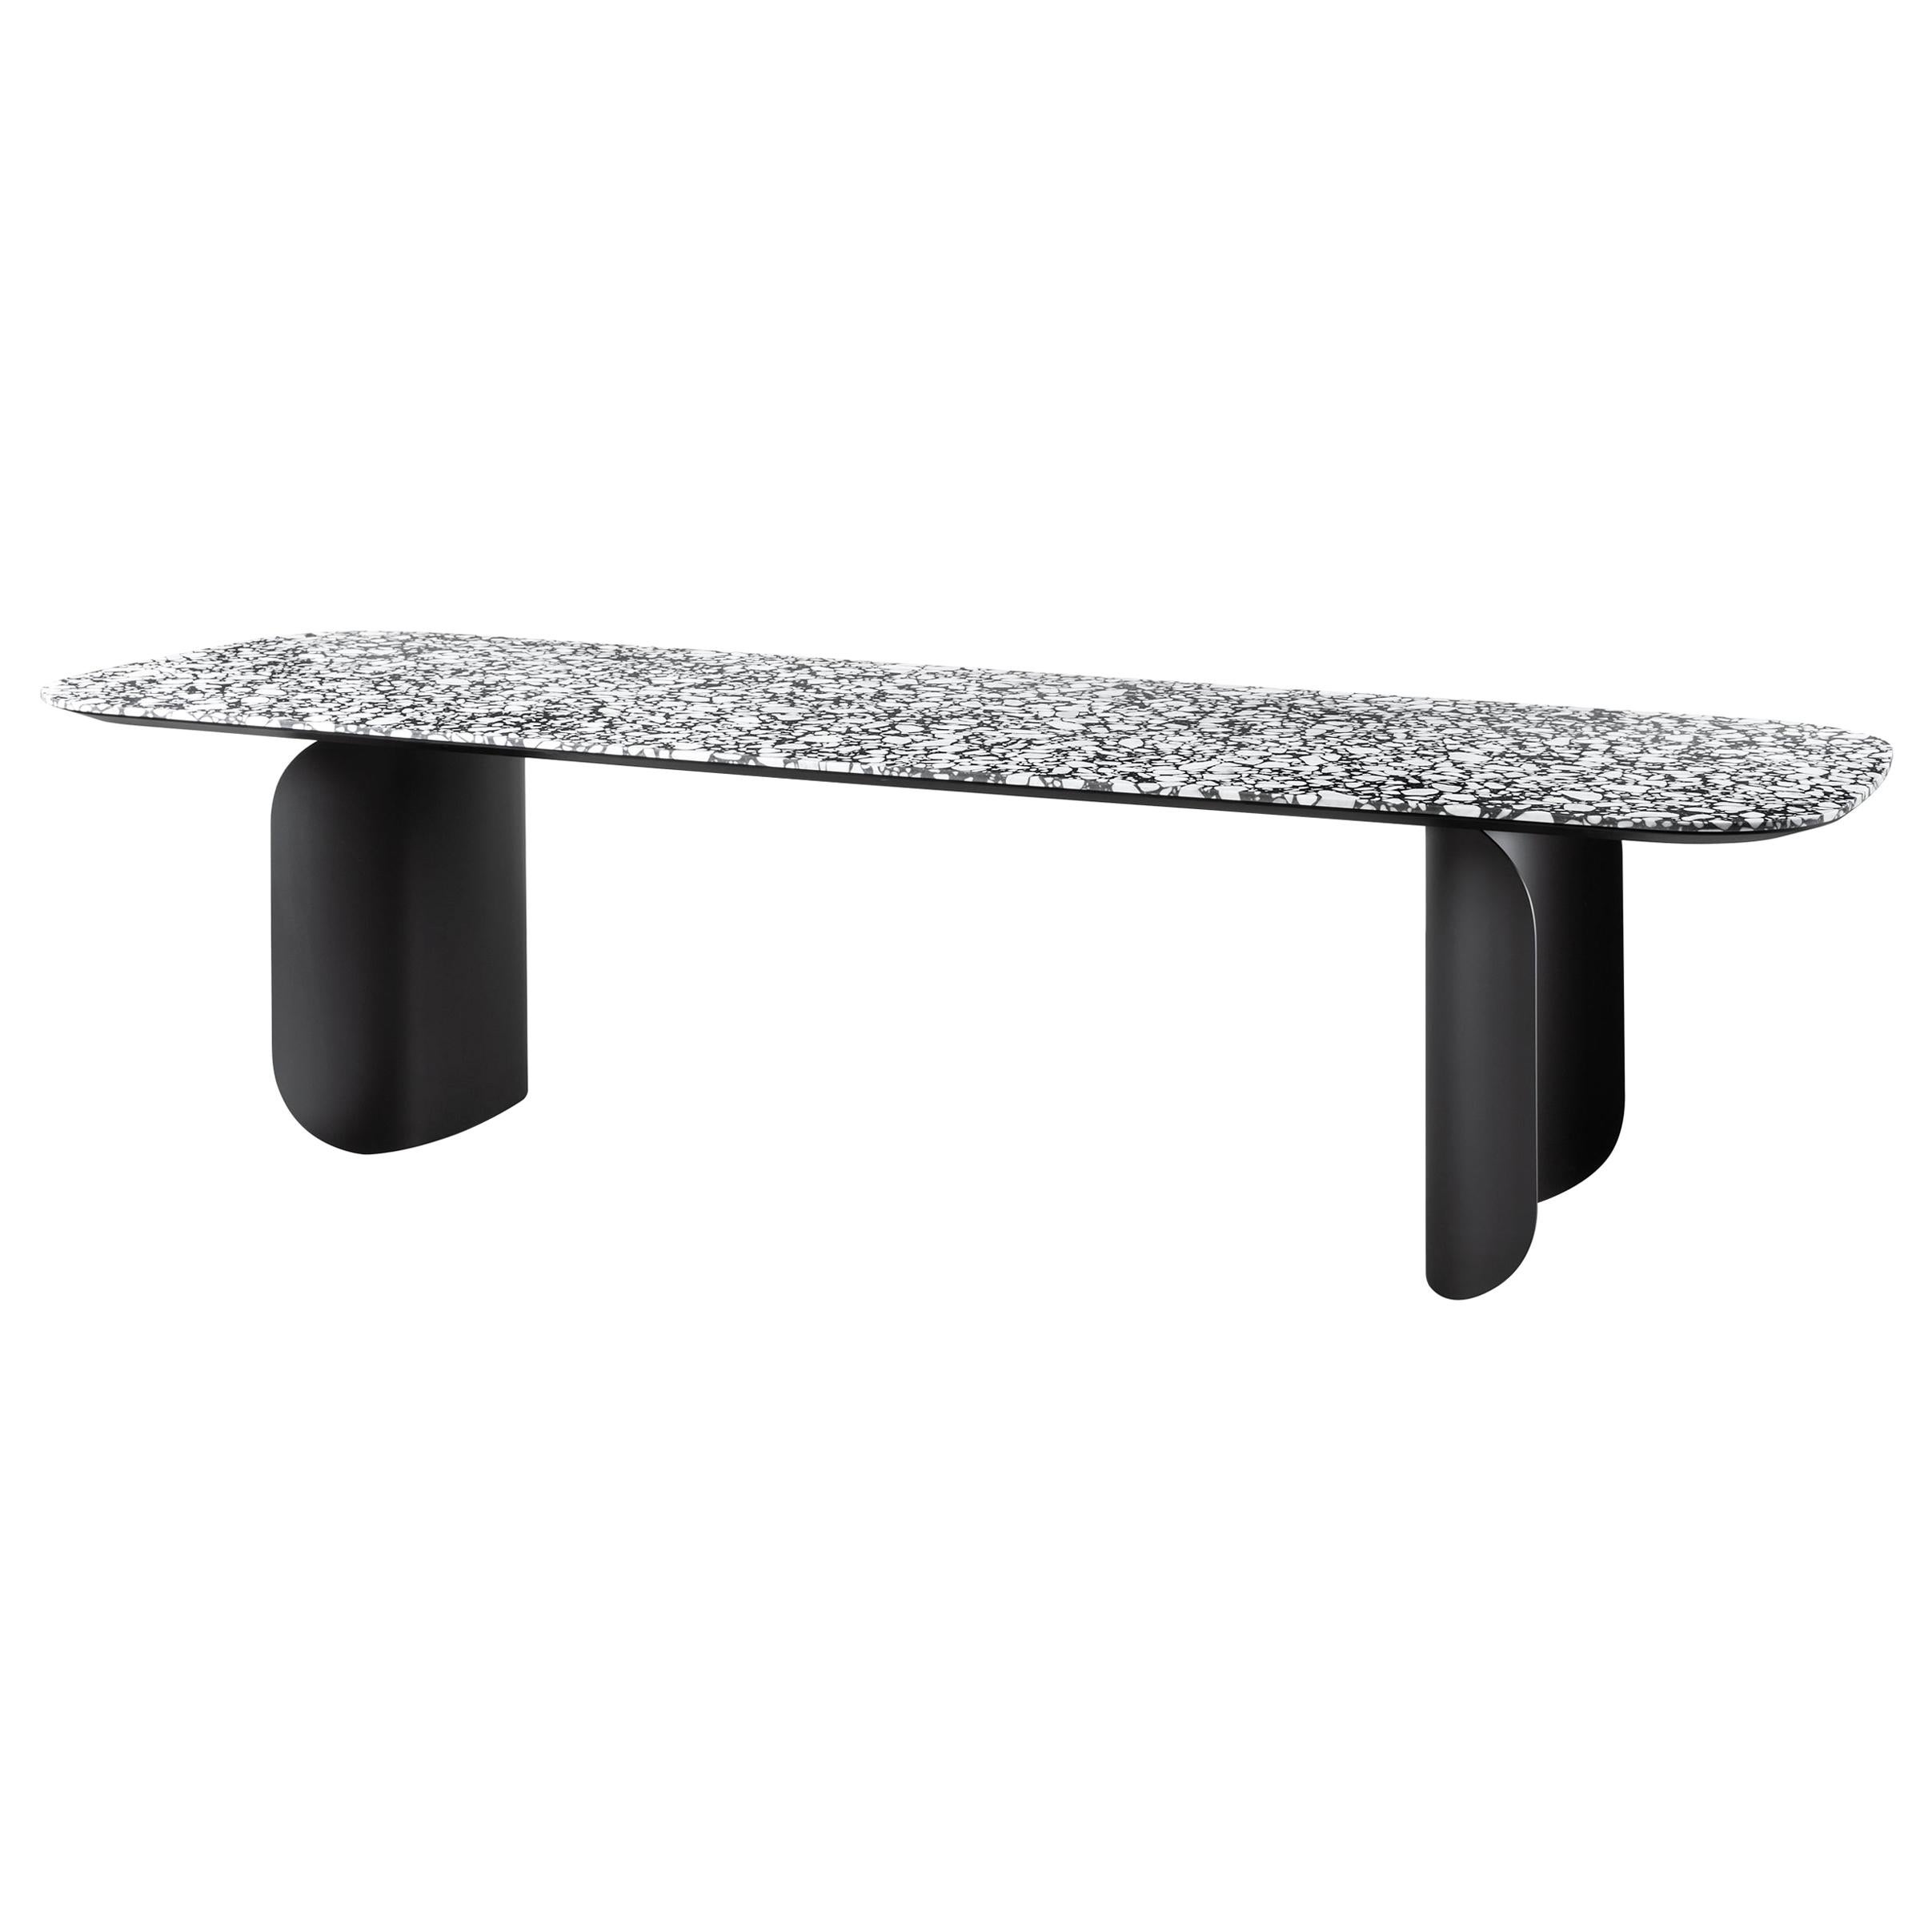 Barry Large Table in Palladio Moro Top with Black Lacquered Base by Alain Gilles